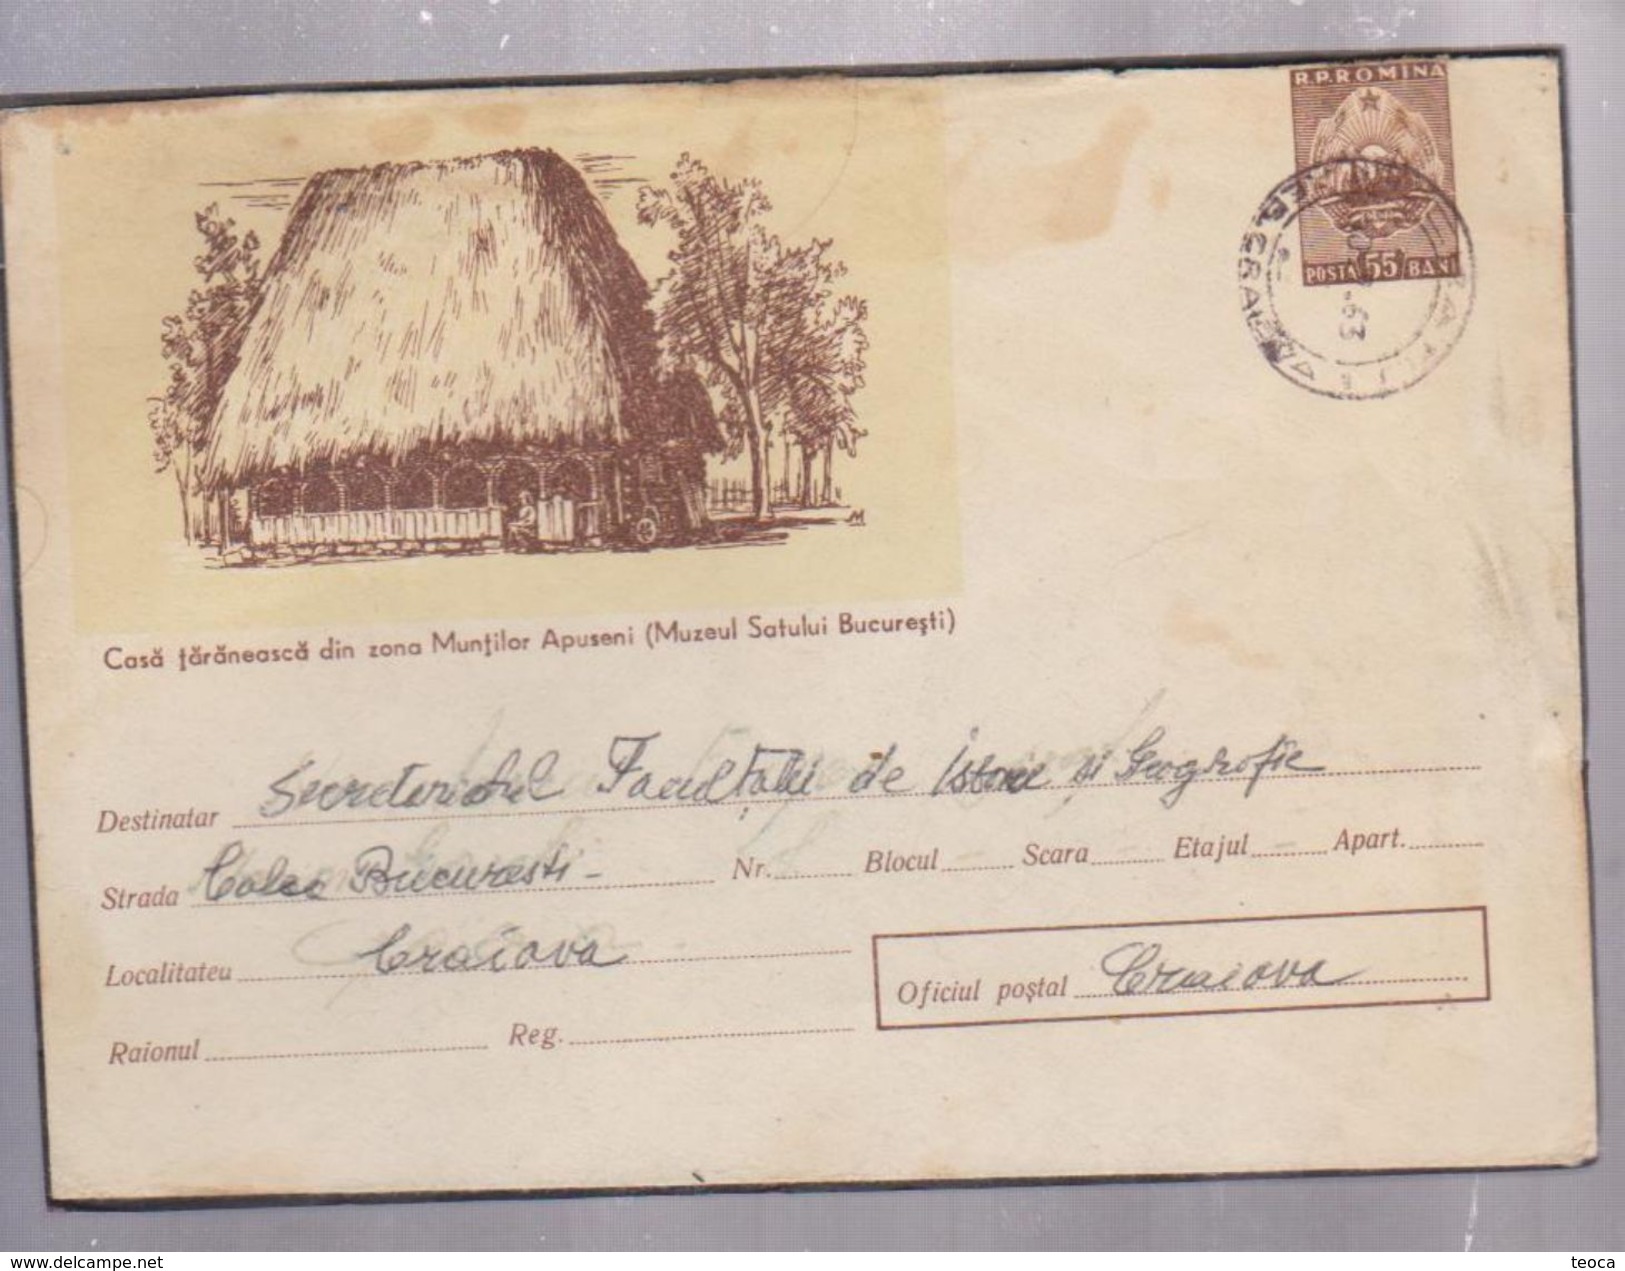 Envelope Romania  1963, CIRCULATED CERATI ,country Oltenia Raditional Folk House - Covers & Documents